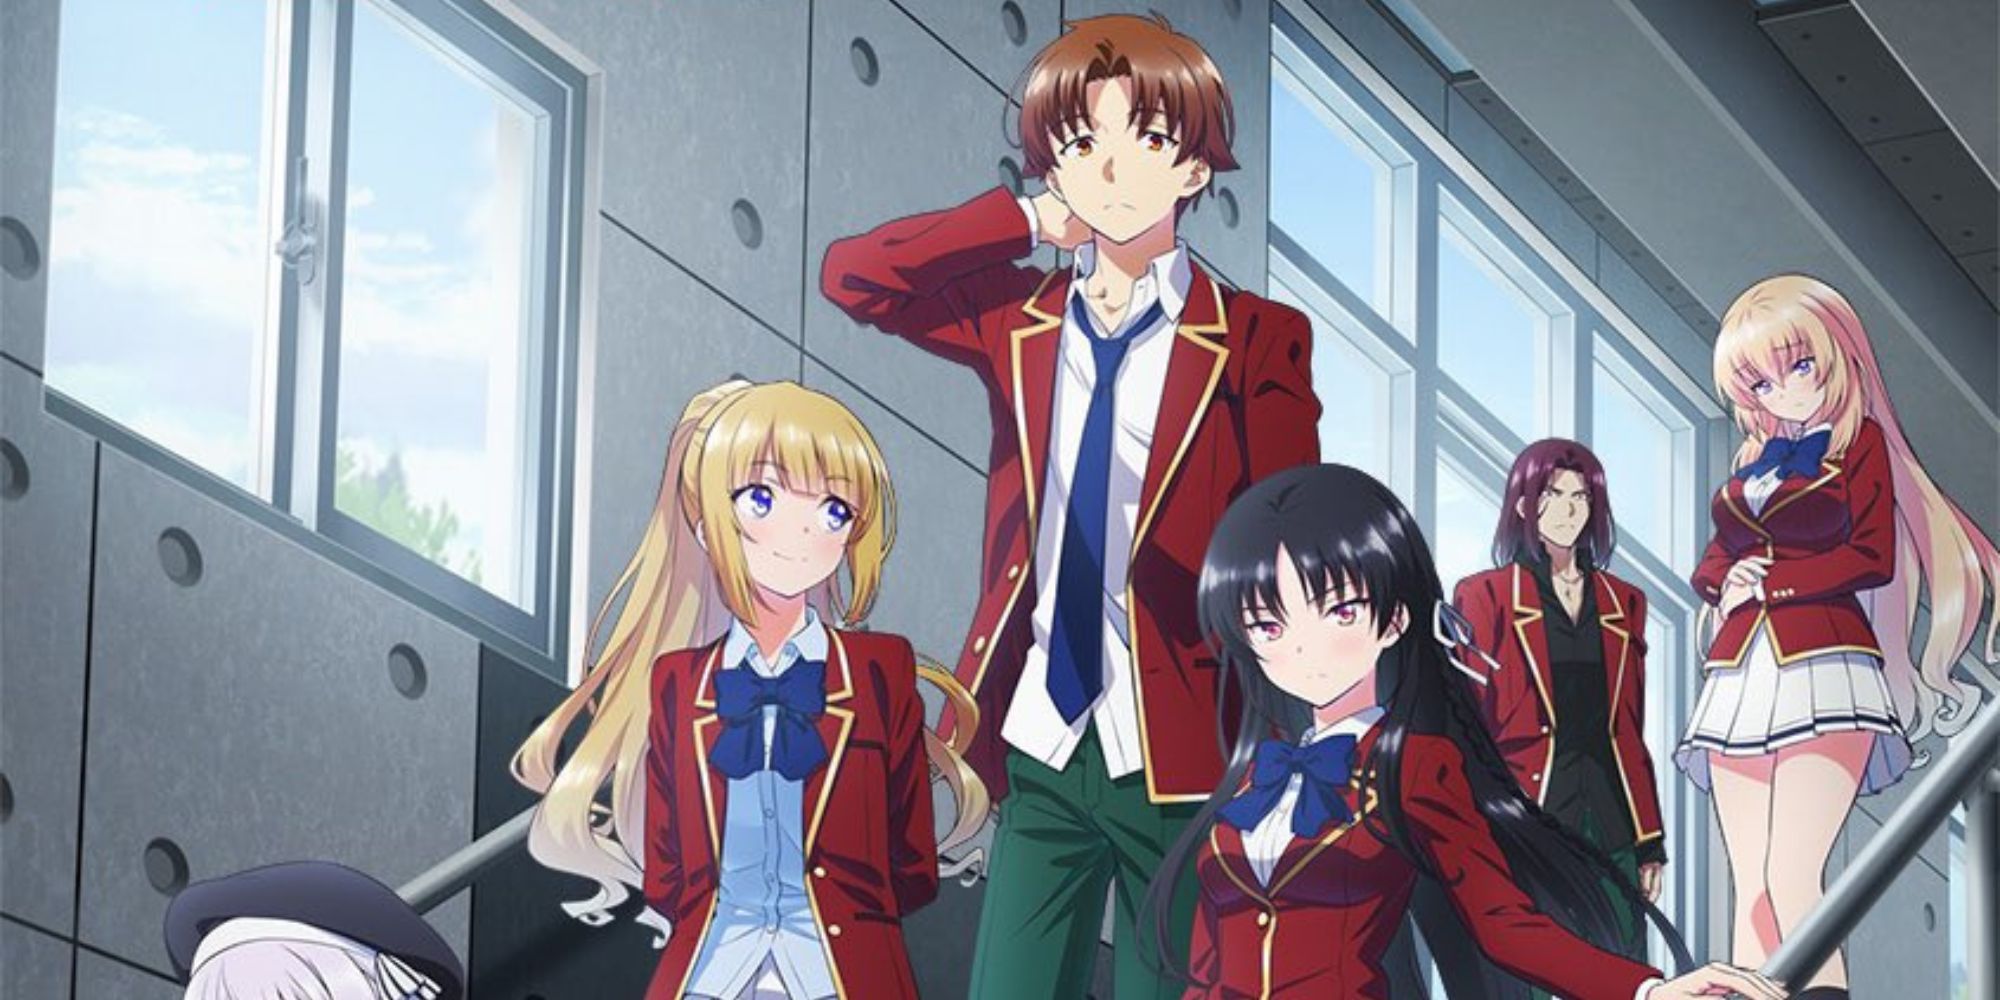 Classroom of the Elite season 3: 2023 release confirmed for anime